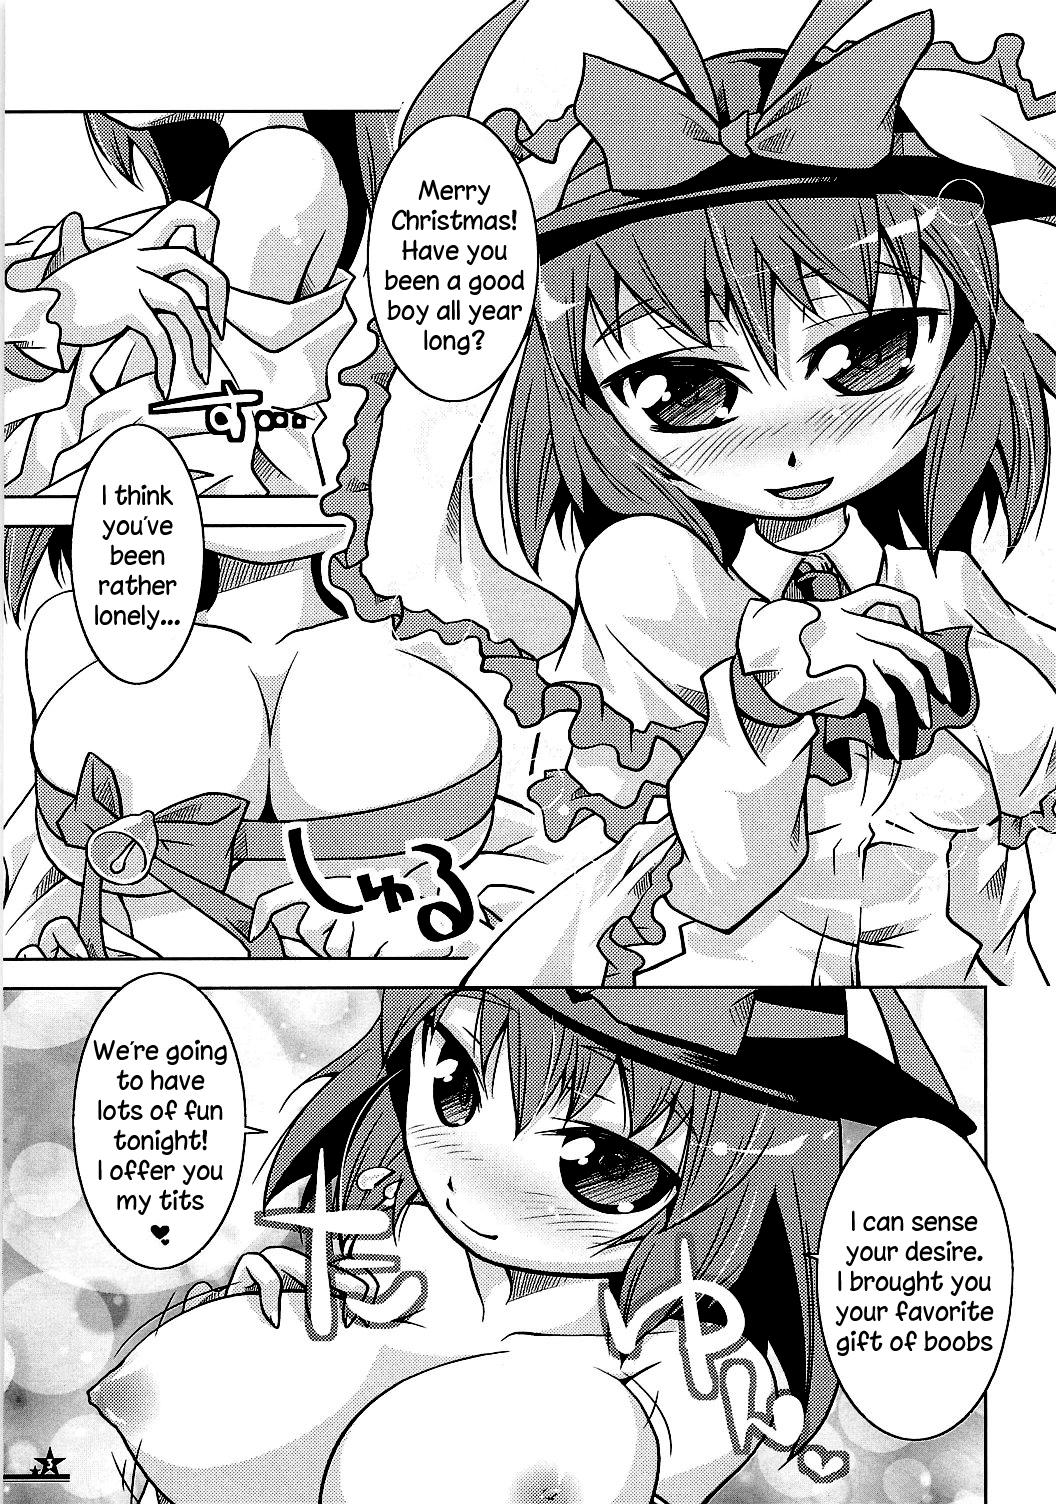 Milfporn Christmas Night Fever - Touhou project Asian - Page 2